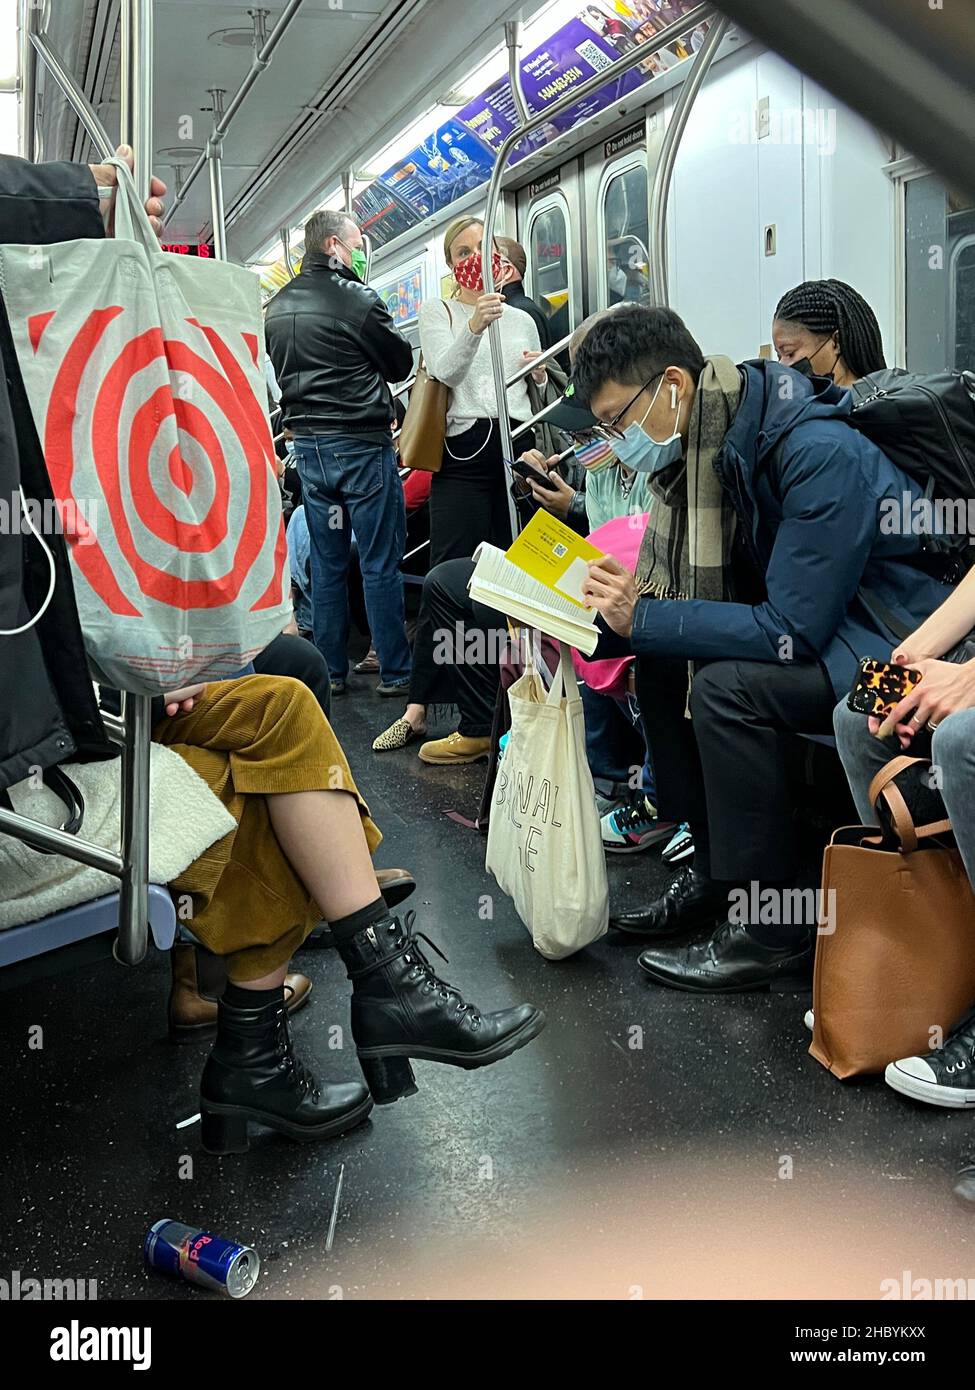 People riding a New York City subway train in face masks but unable to social distance very well  toward the end of the 2nd year of the Covid-19 pandemic. Stock Photo